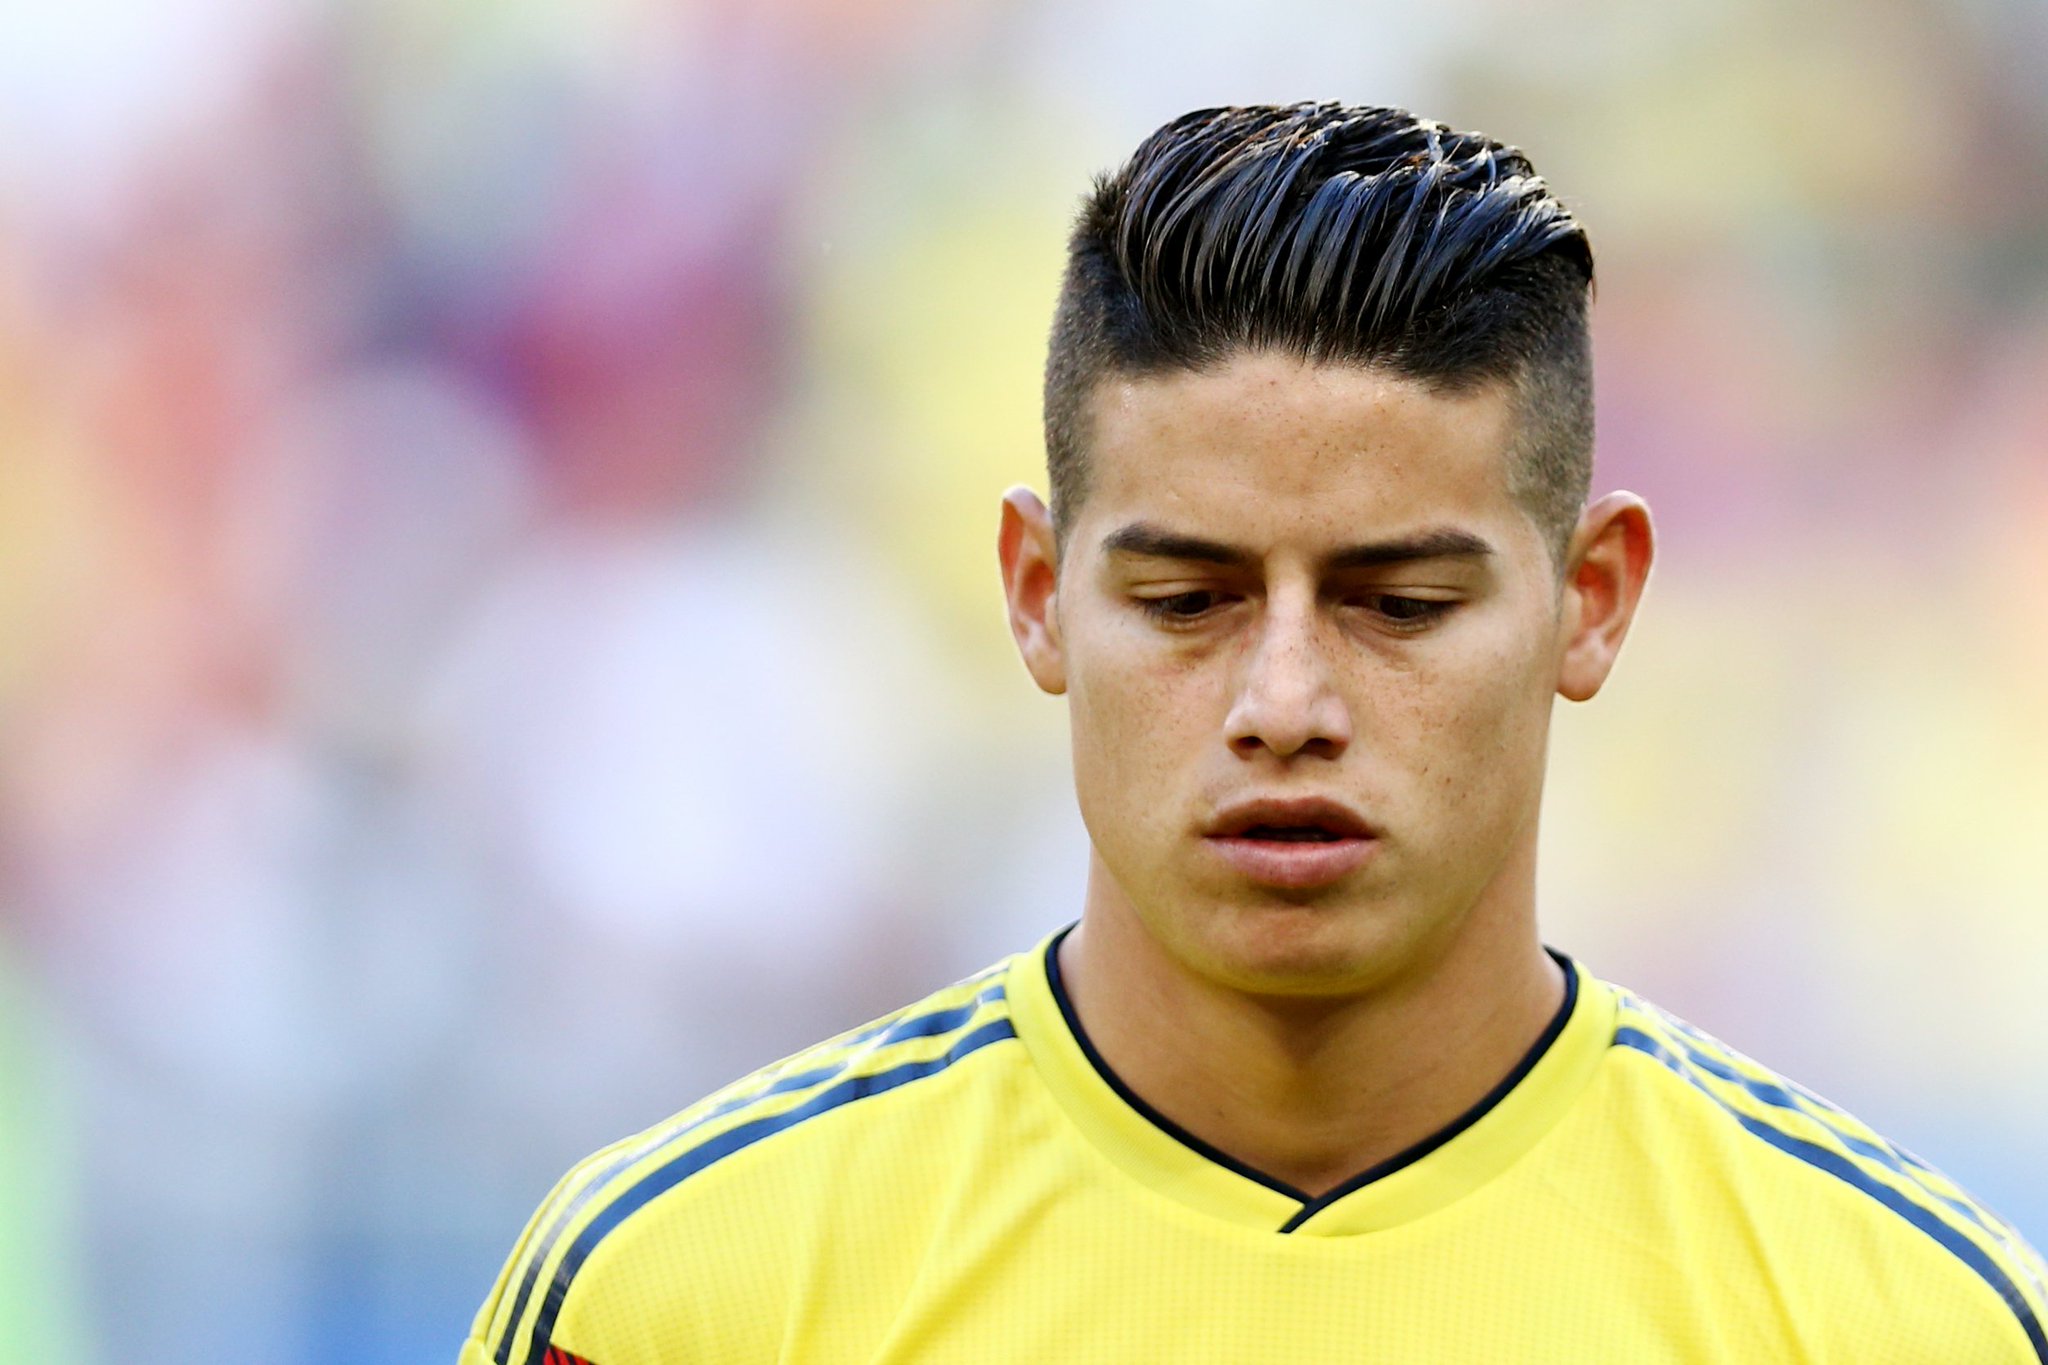 “Bayern Munich confirm whether James Rodríguez will return to Real Madrid t...